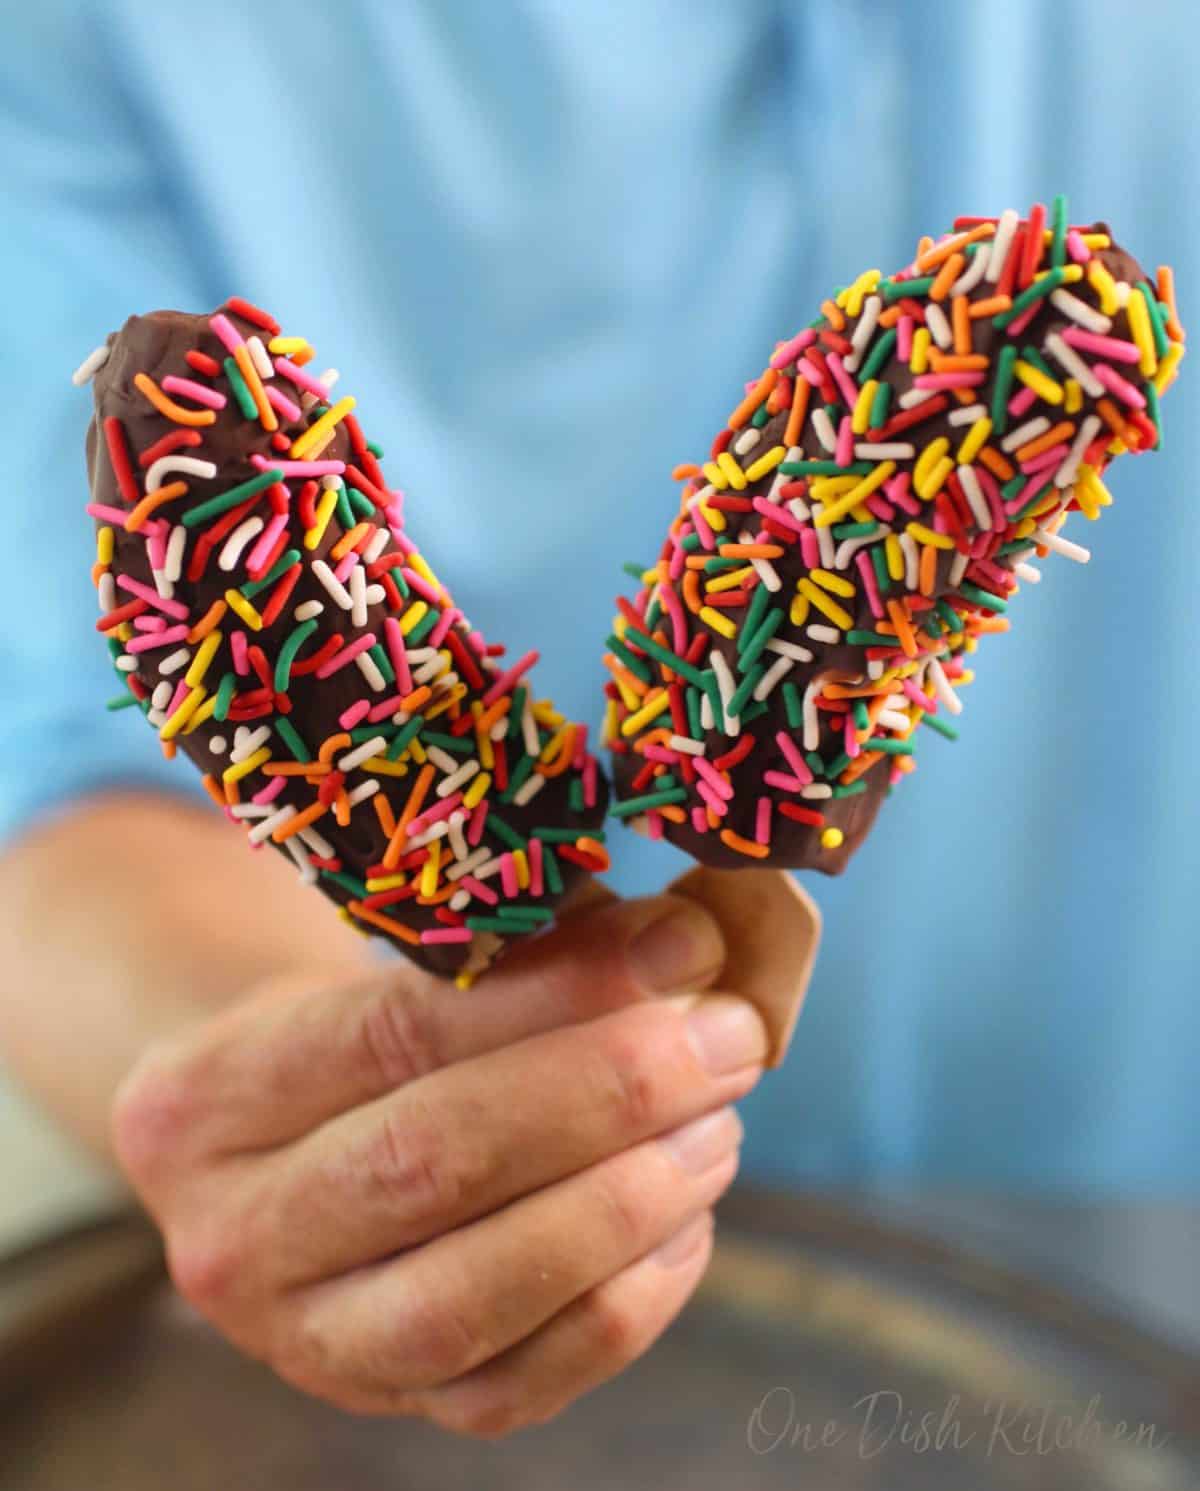 a person holding two frozen chocolate bananas with sprinkles in one hand.